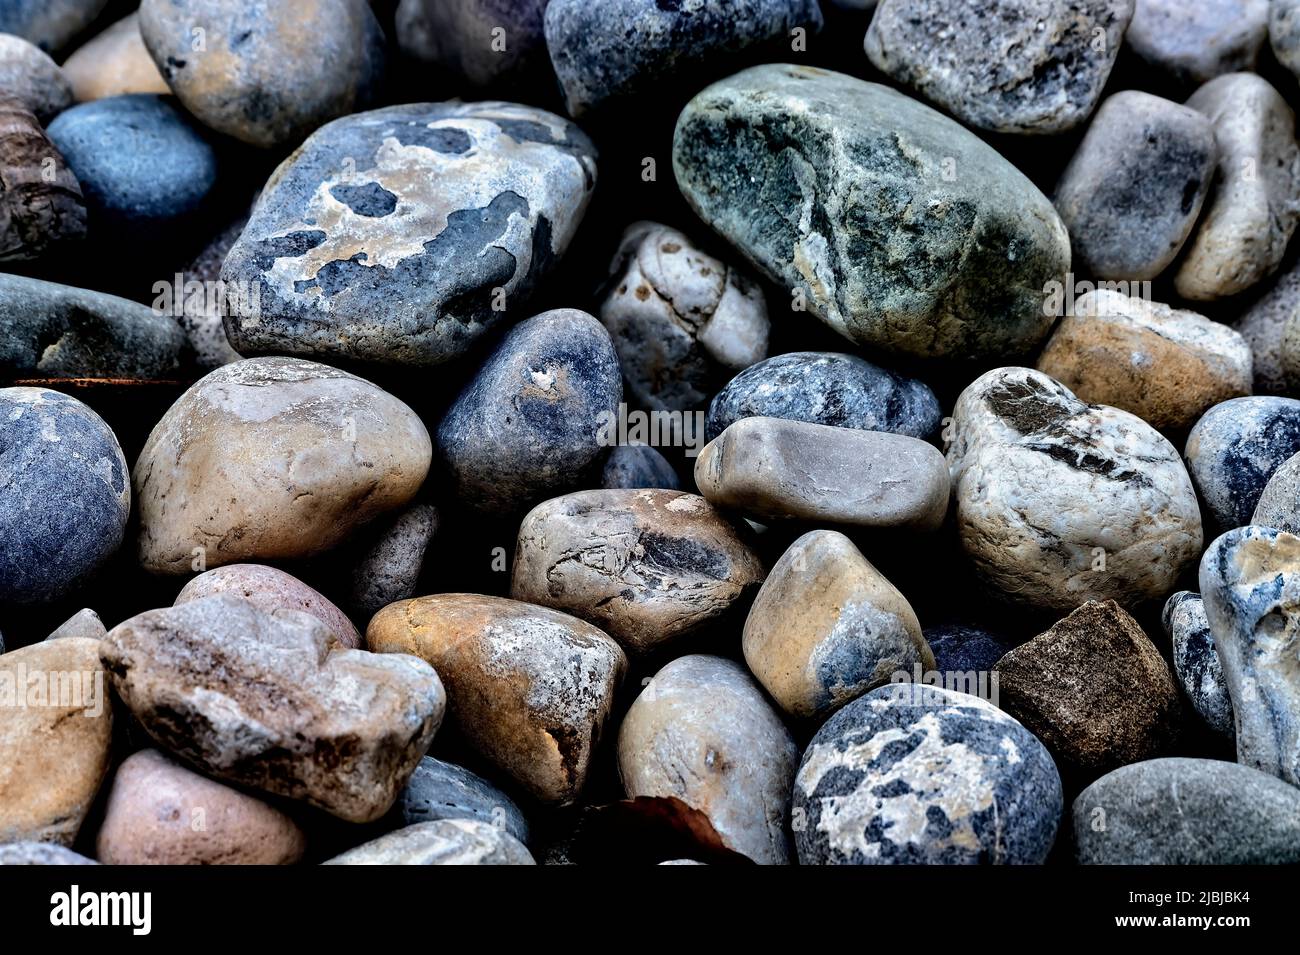 A close up image of a pile of colorful beach stones Stock Photo